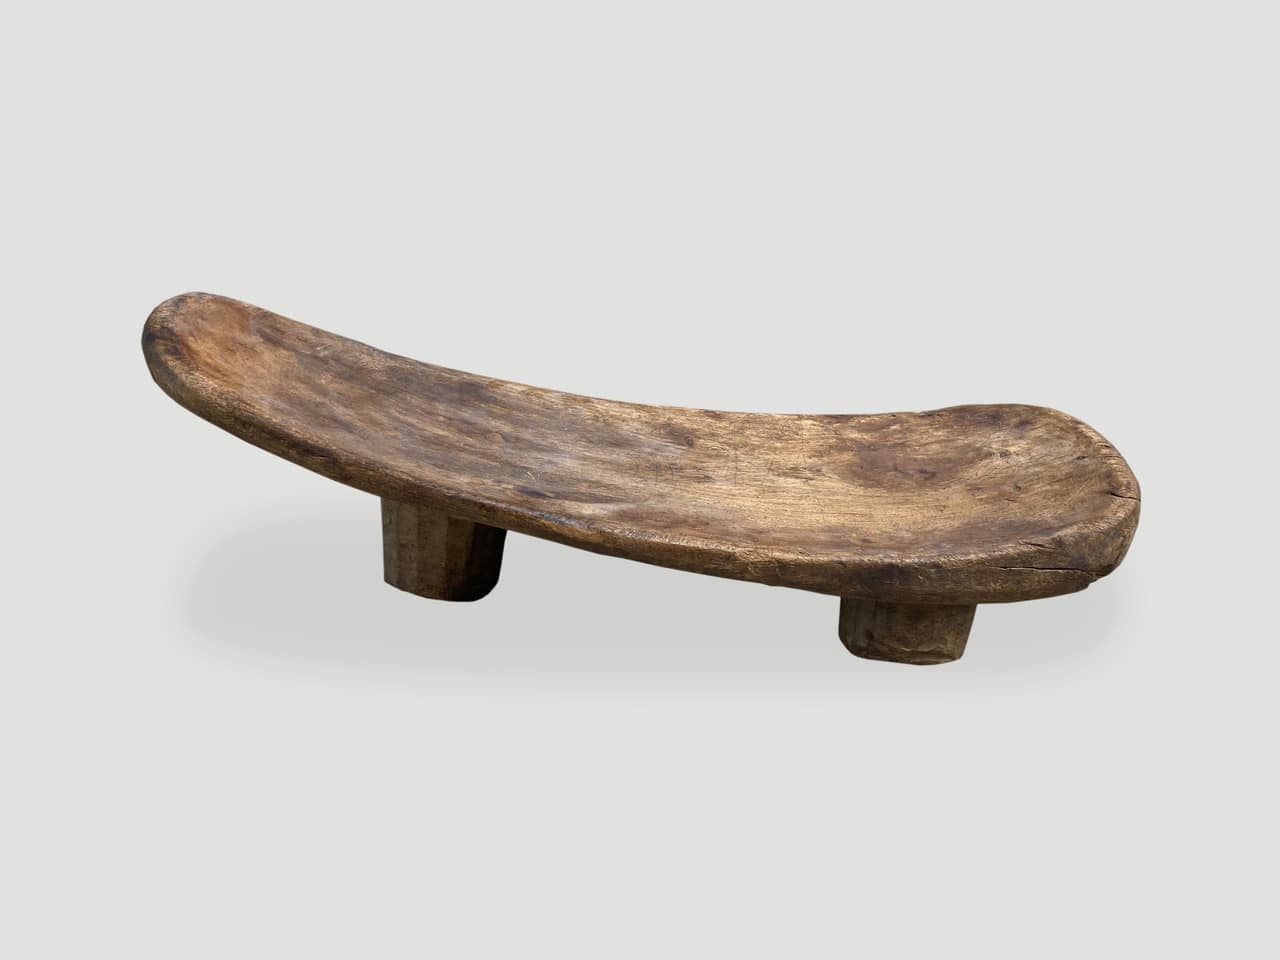 Wabi Sabi antique wooden bench or chaise